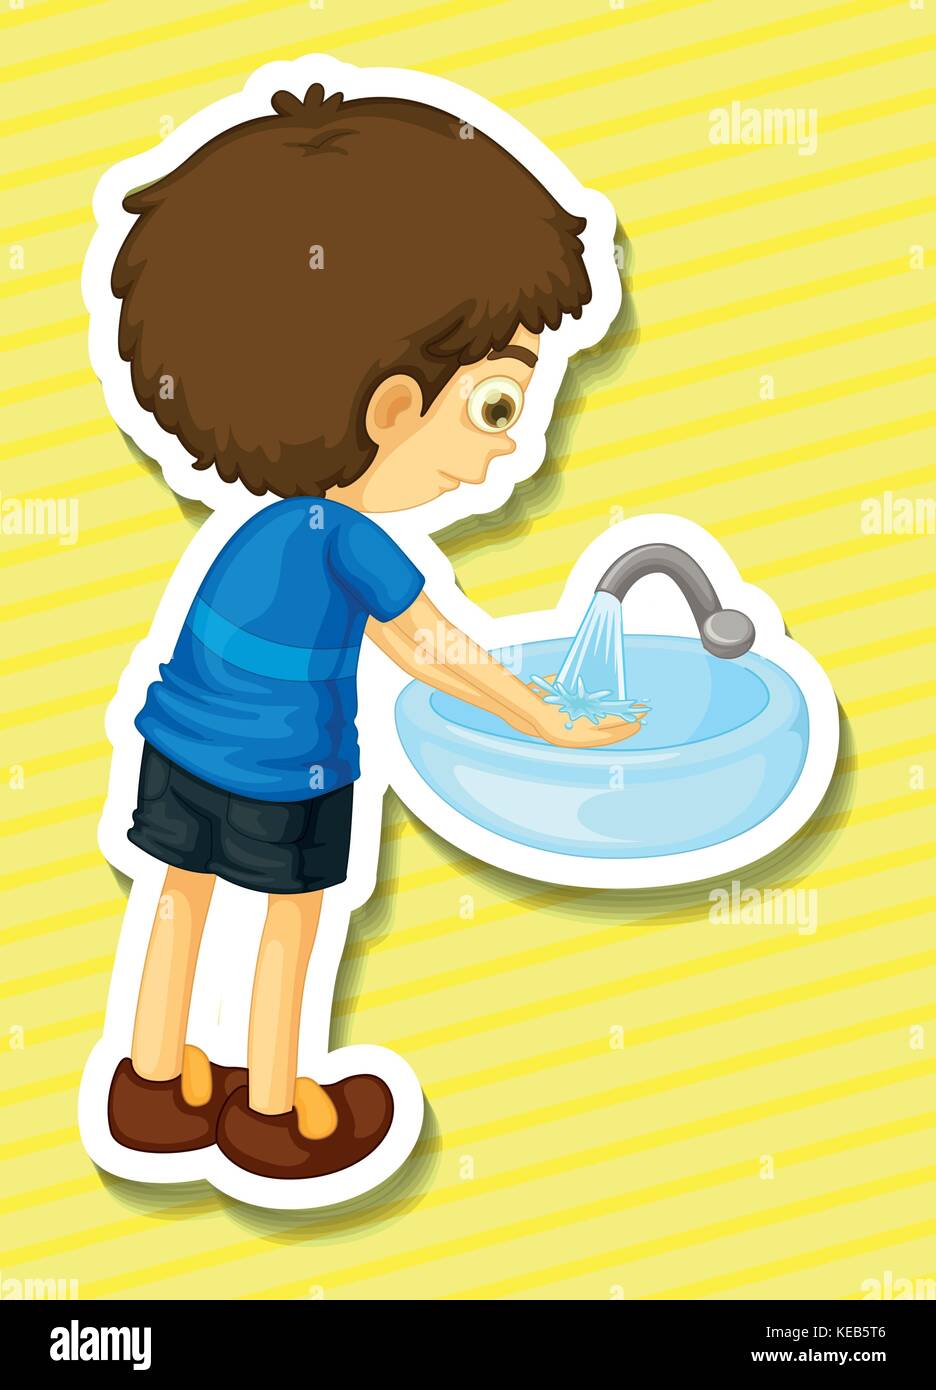 Sticker of a boy washing his hands in a sink Stock Vector